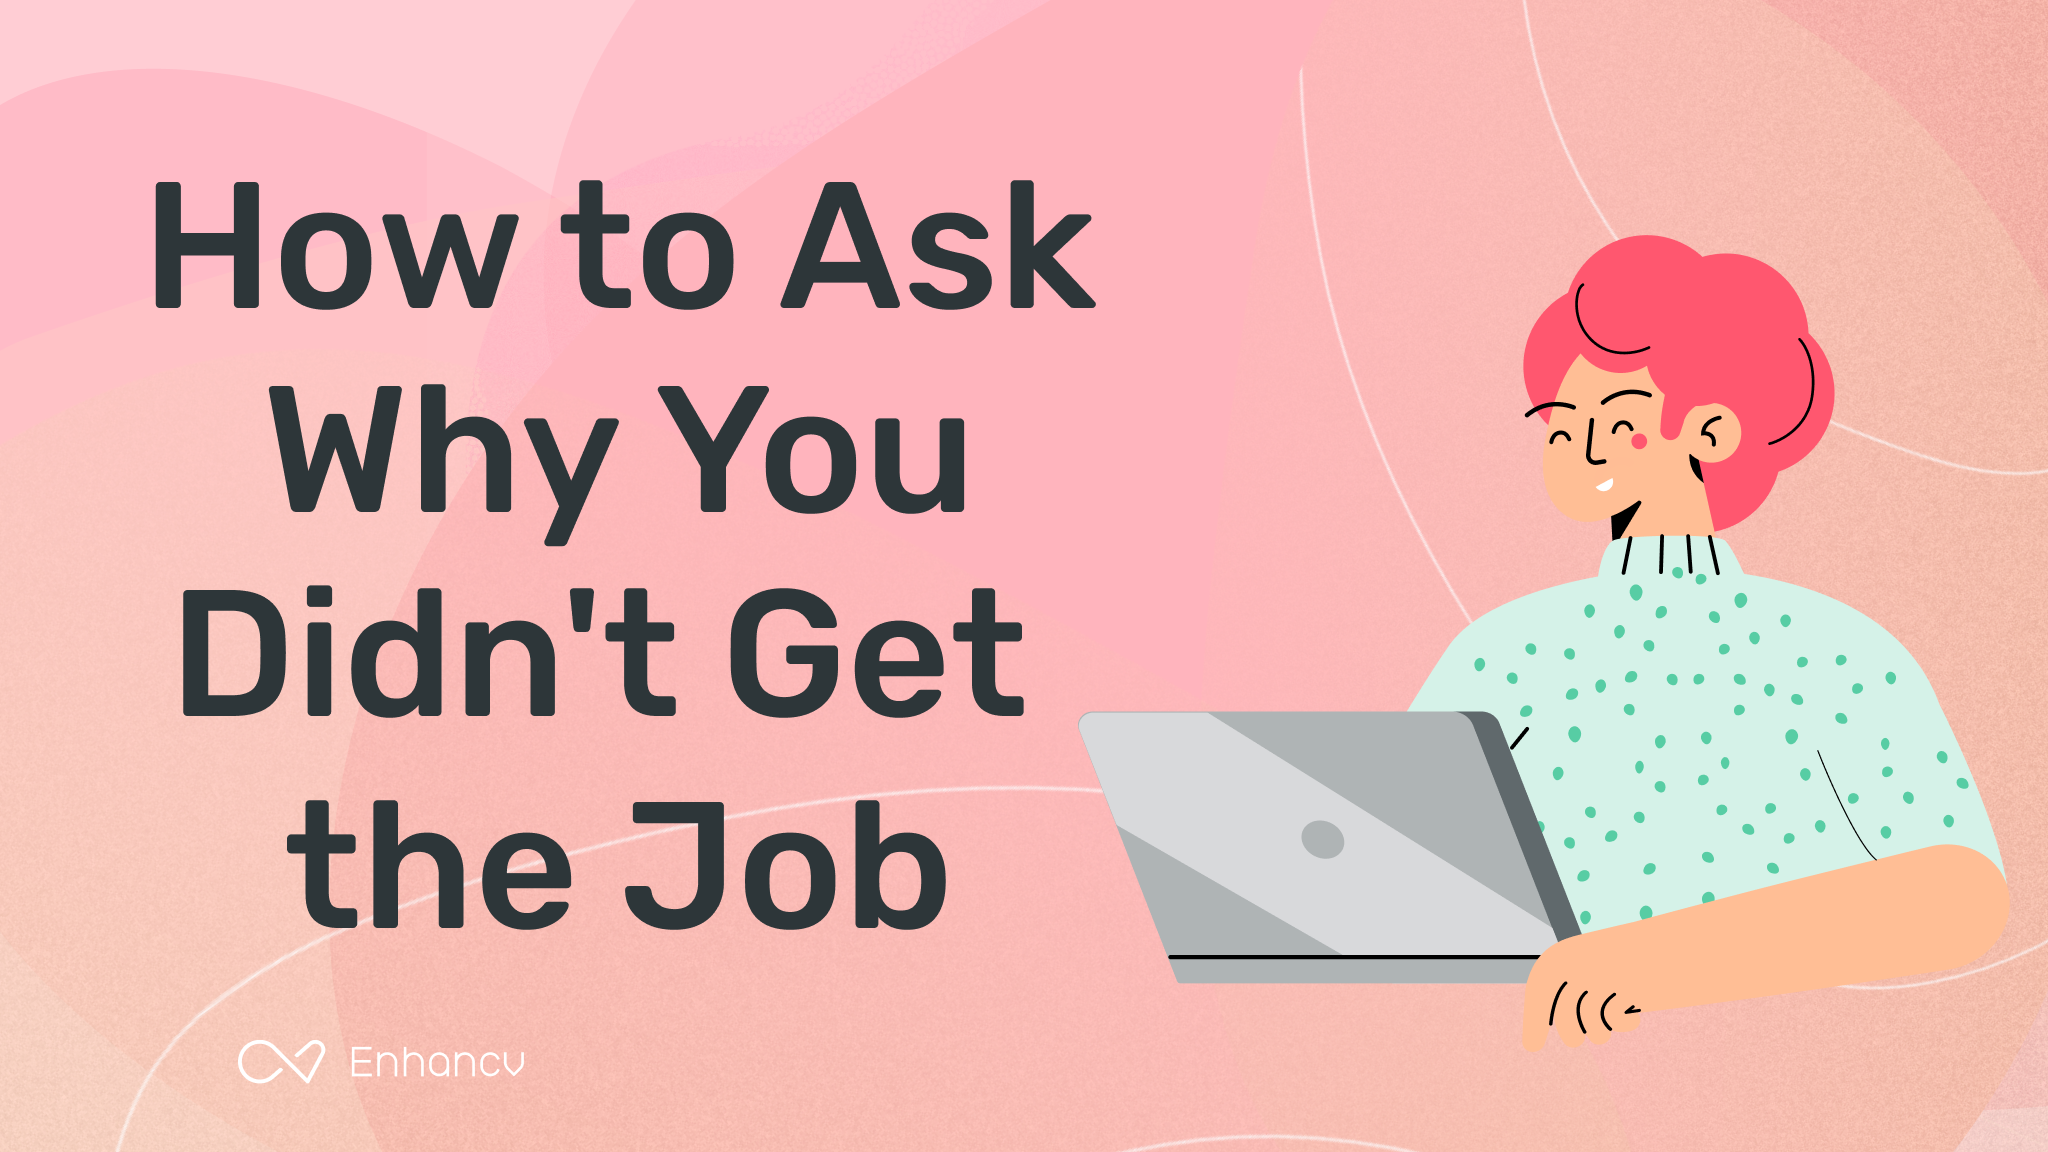 how-to-ask-why-you-didn-t-get-the-job-enhancv